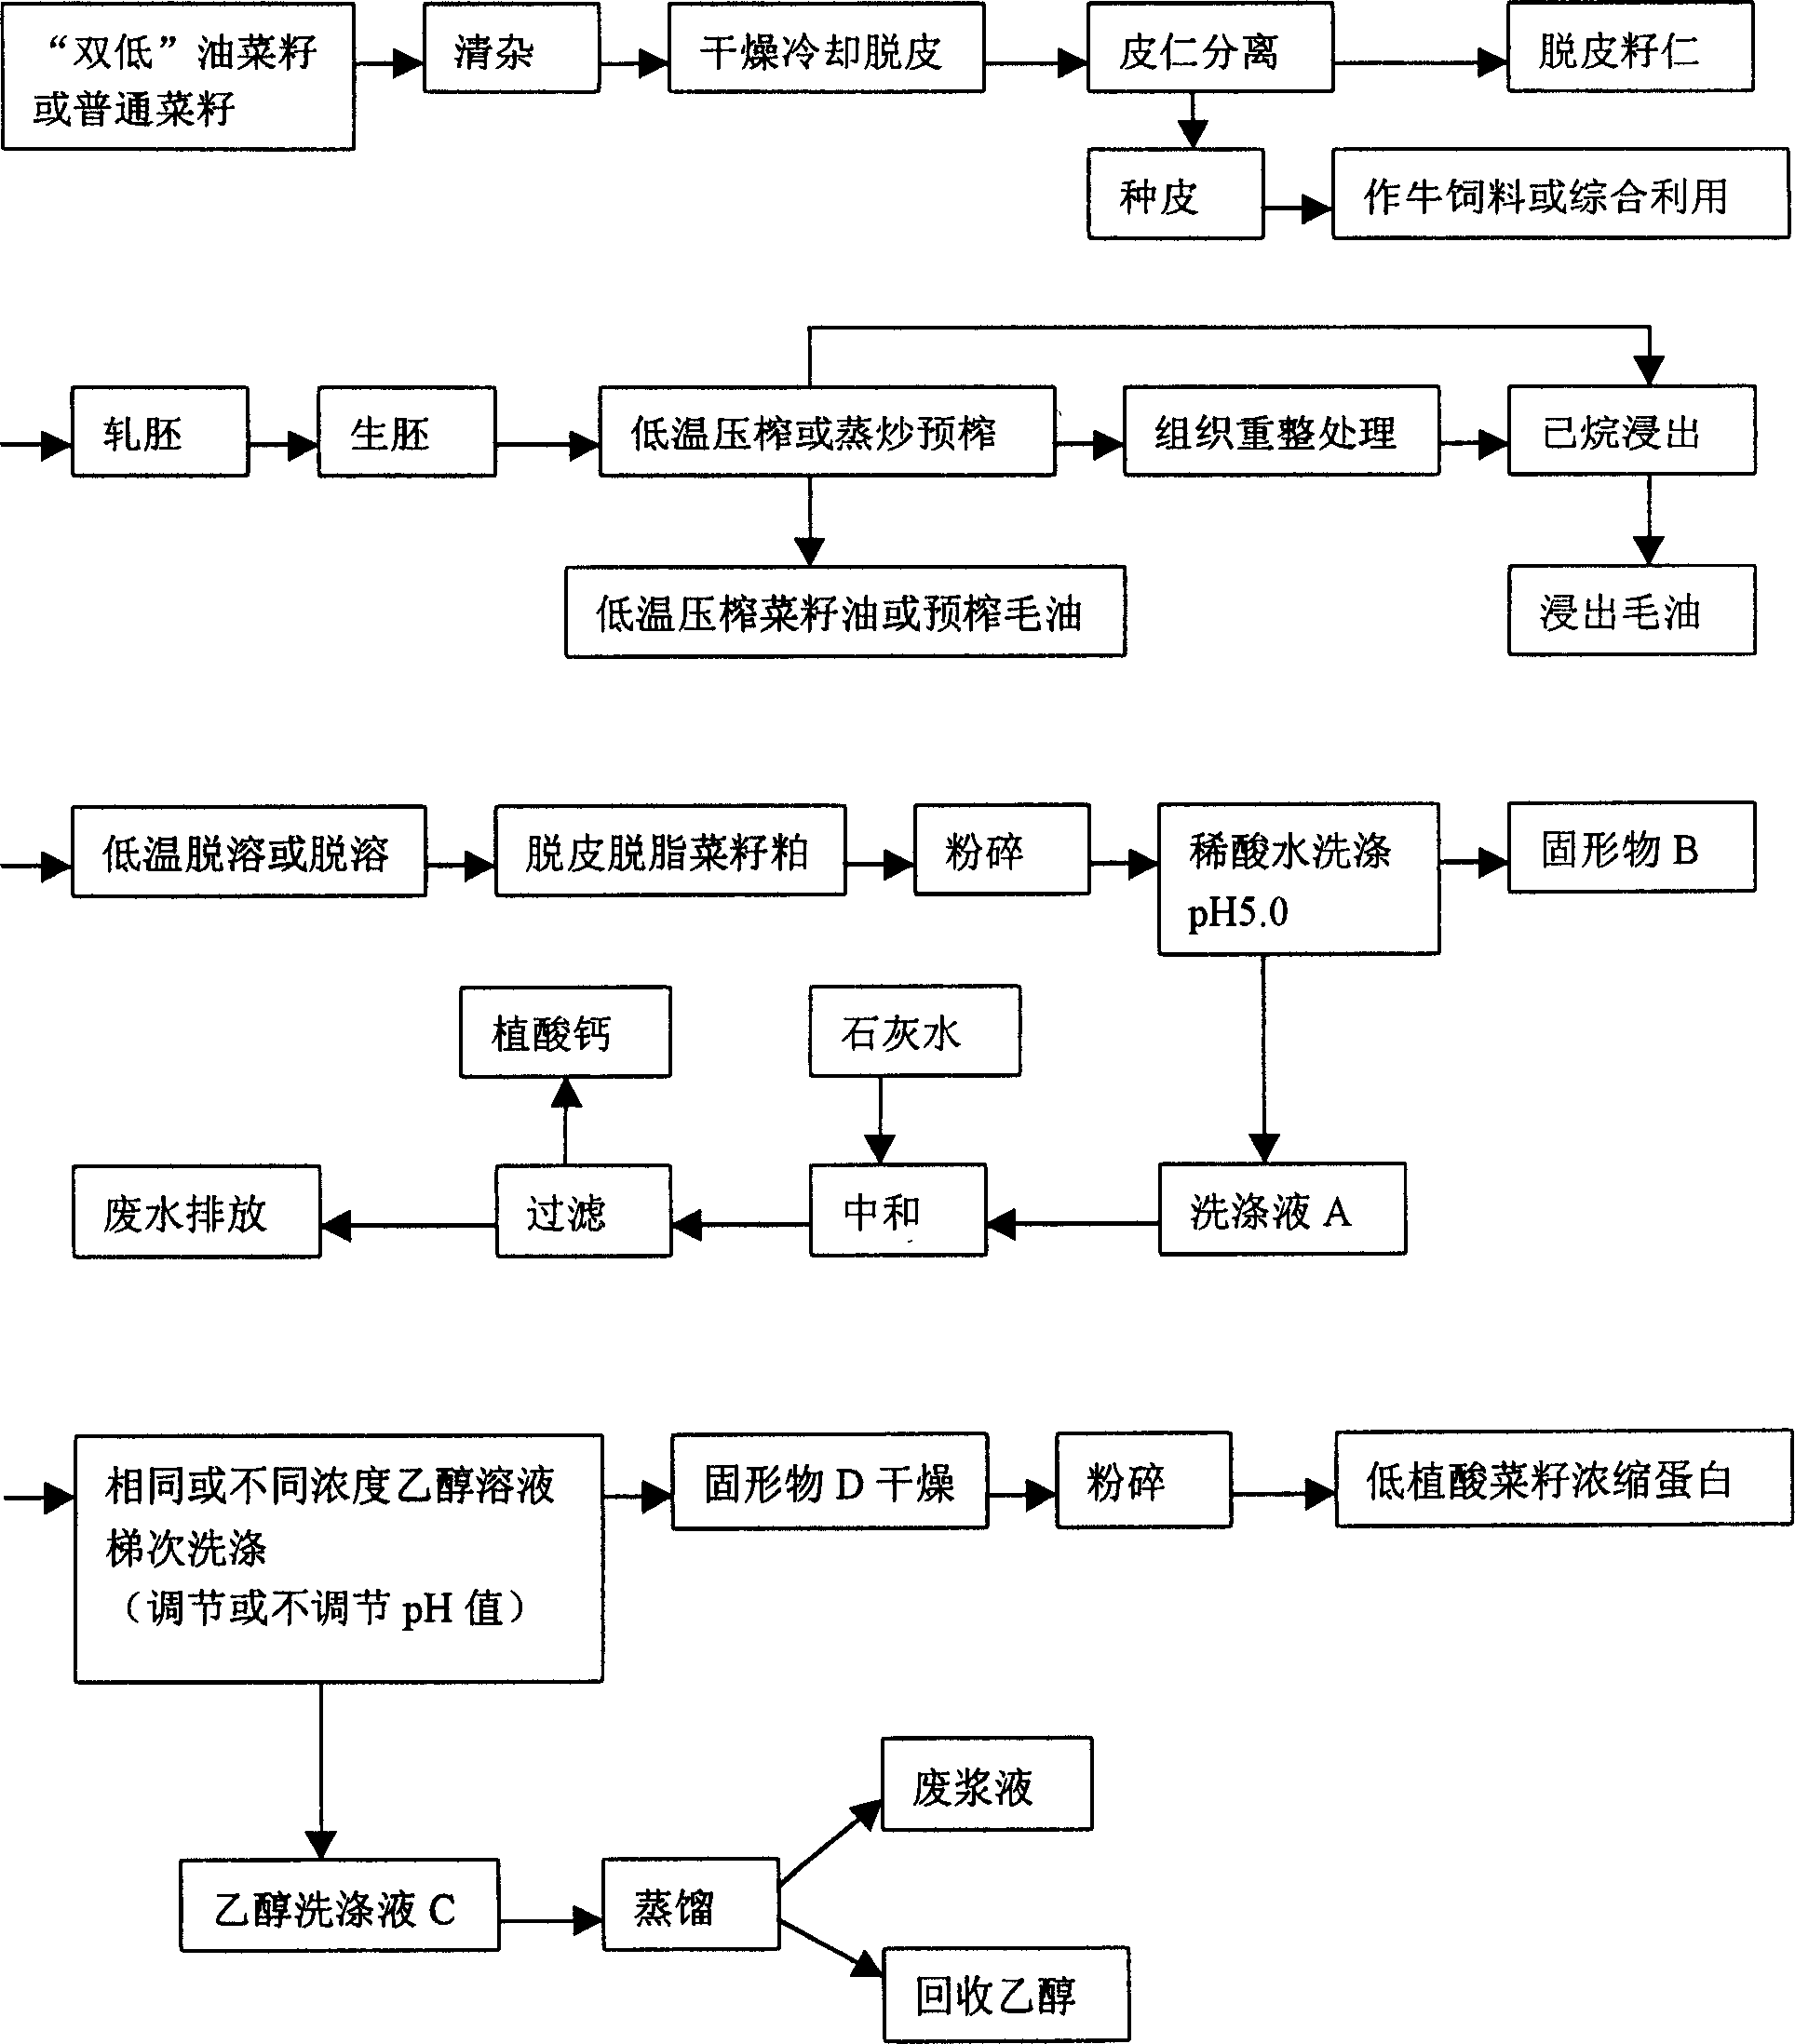 Process for preparing low phytic acid rapeseed protein concentrate by using water and ethanol